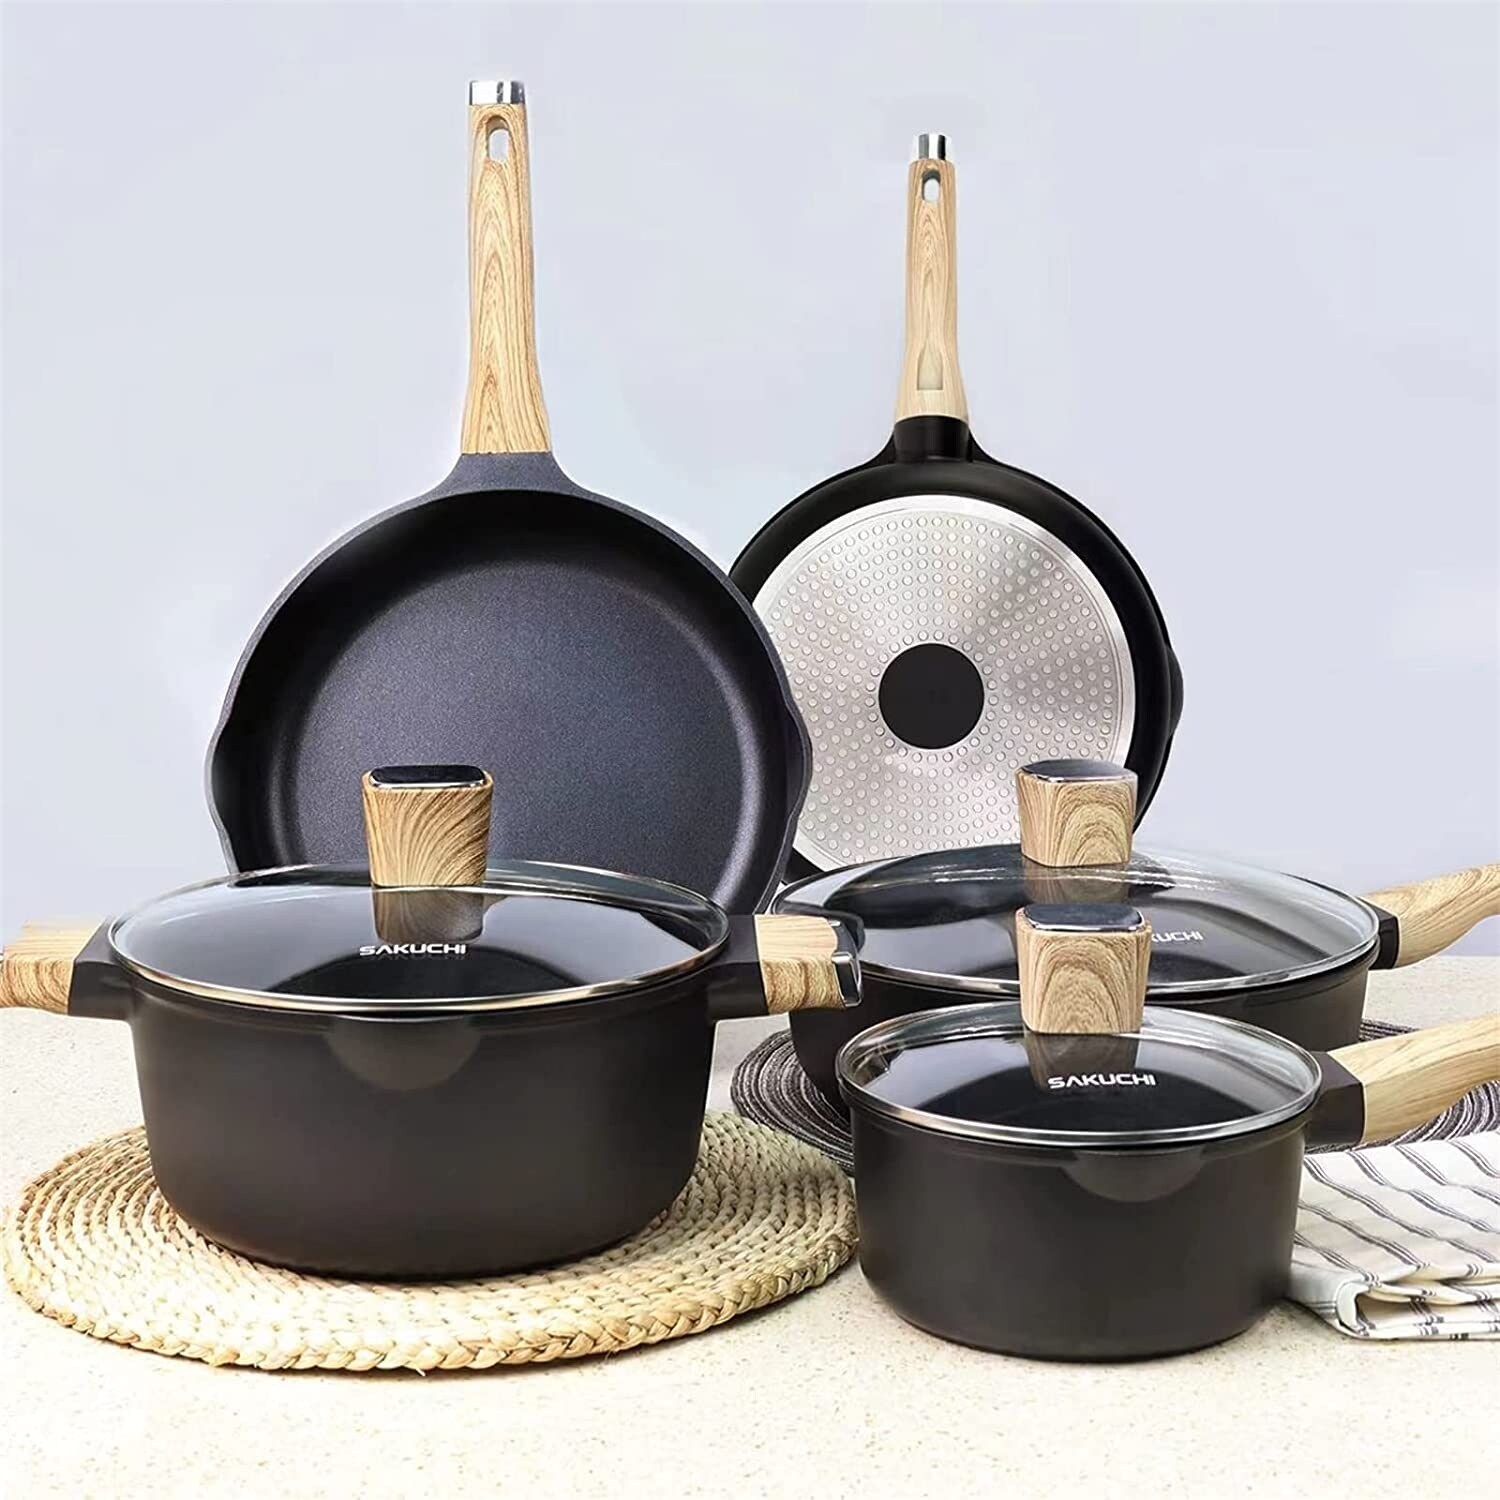 https://ak1.ostkcdn.com/images/products/is/images/direct/f71d07a710425e0320a1d6ac594b999c8124835c/Pots-and-Pans-Set-Nonstick%2C-Induction-Kitchen-Cookware-Sets%2C-8-Pcs-Non-Stick-Cooking-Set.jpg